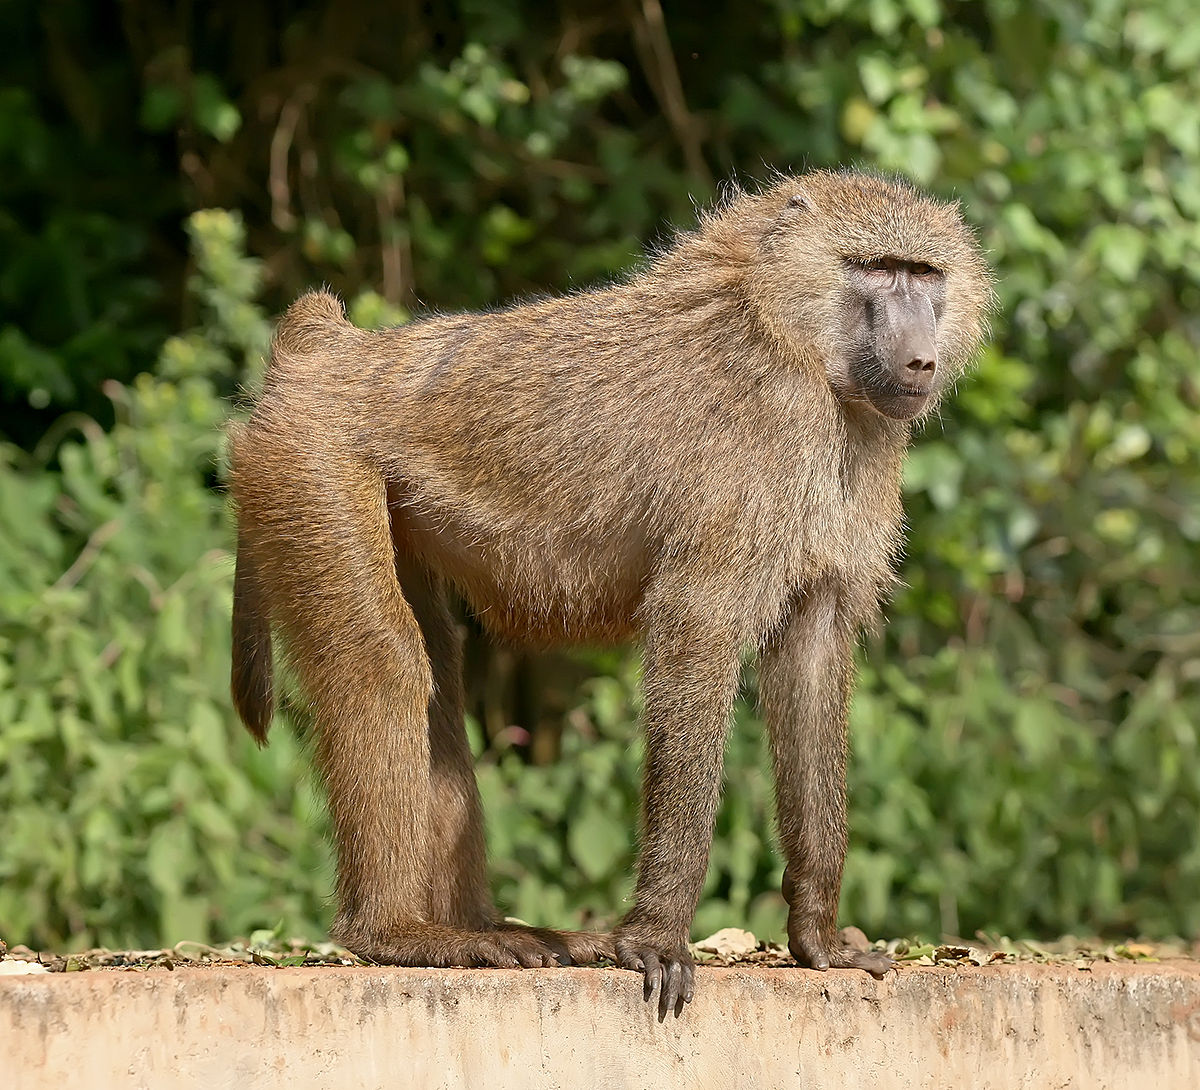 What is the difference between a baboon and a monkey?